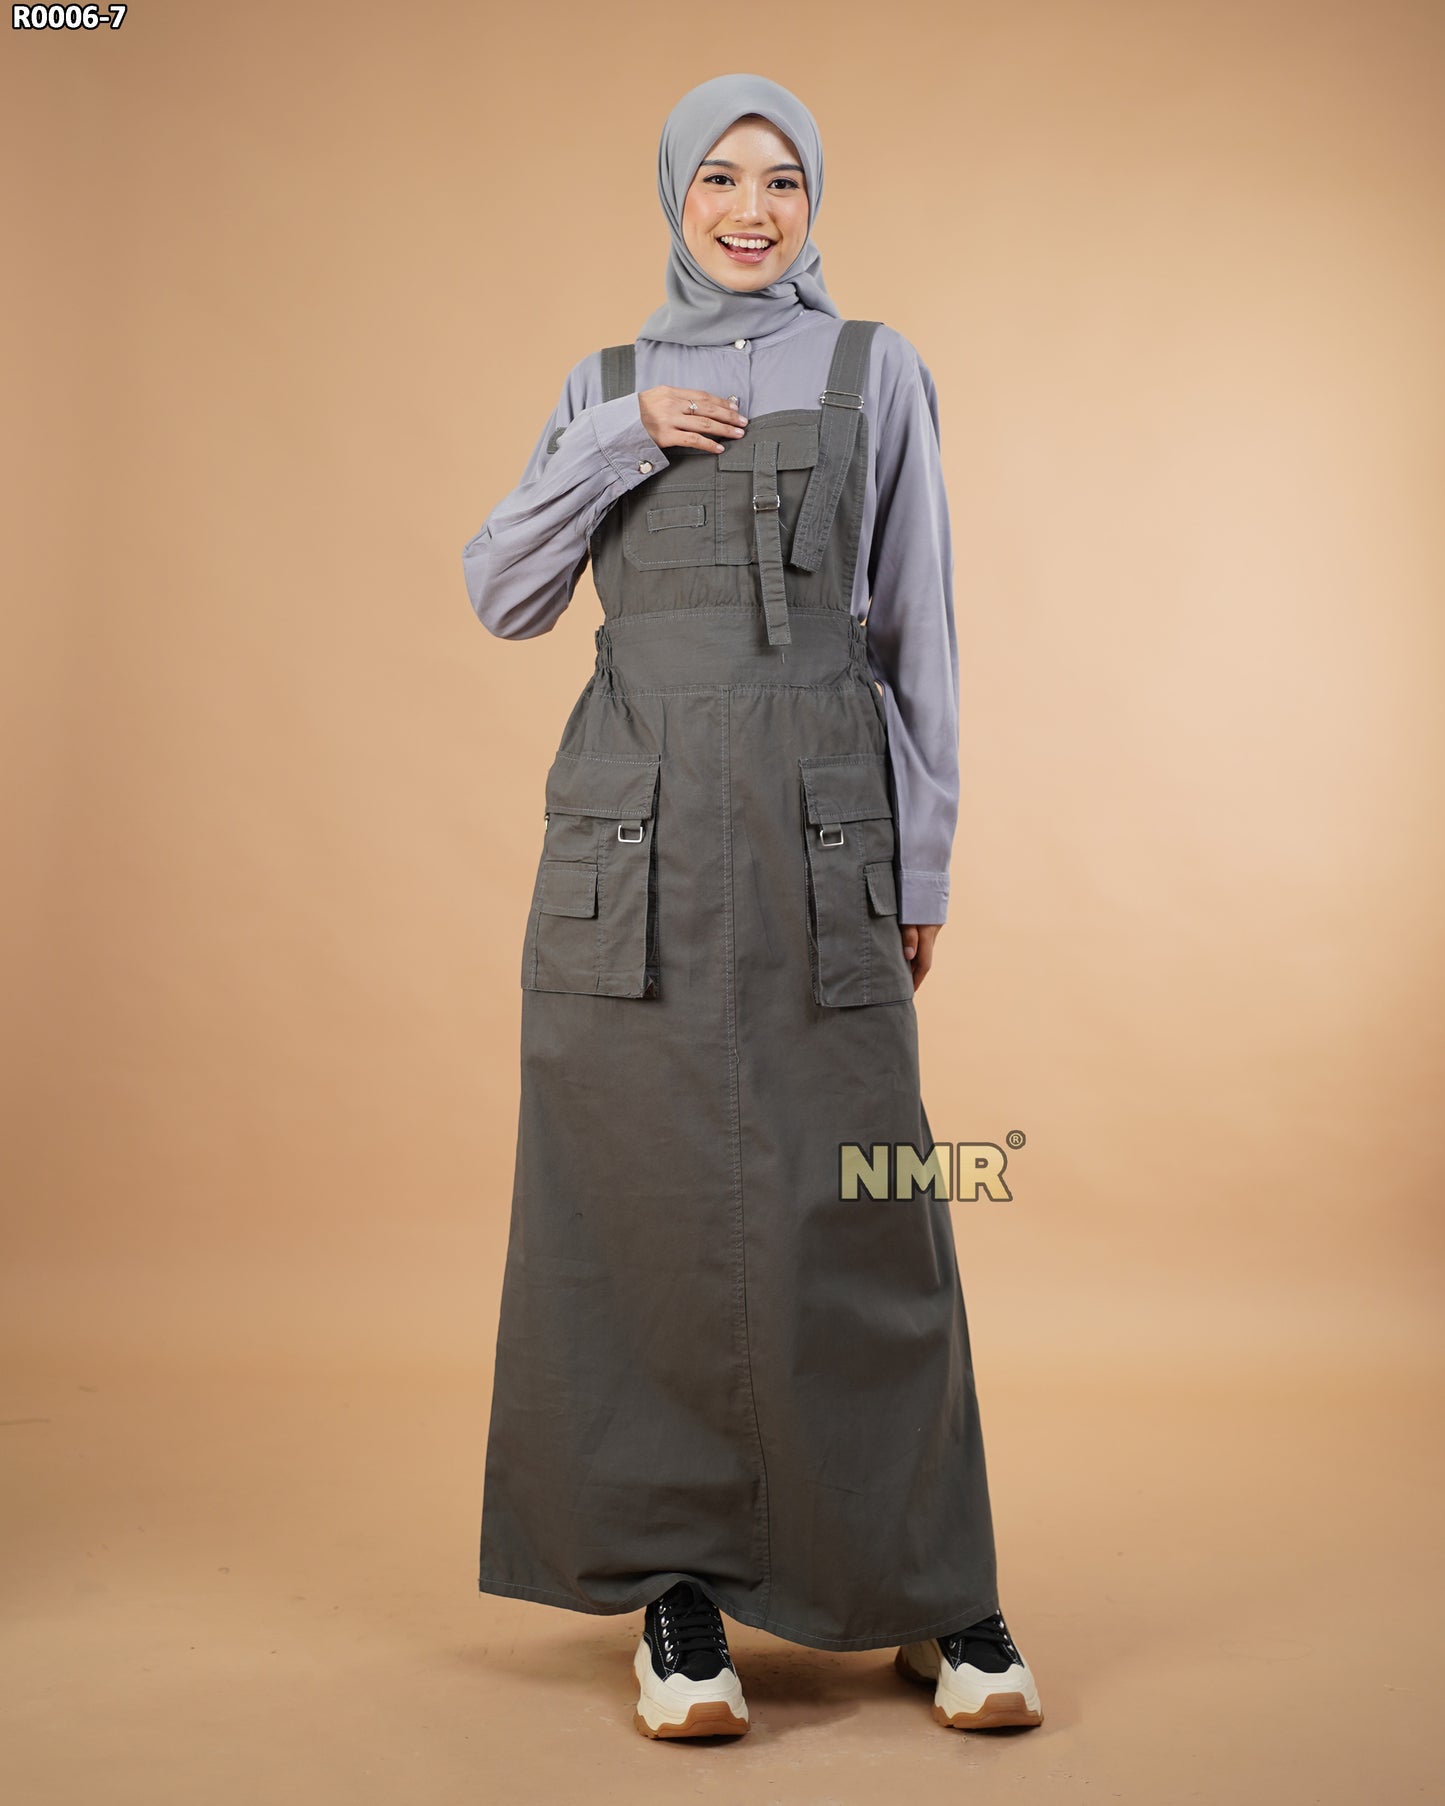 NMR Gamis Jumpsuit Overall Baby Canvas Vol R0006-7